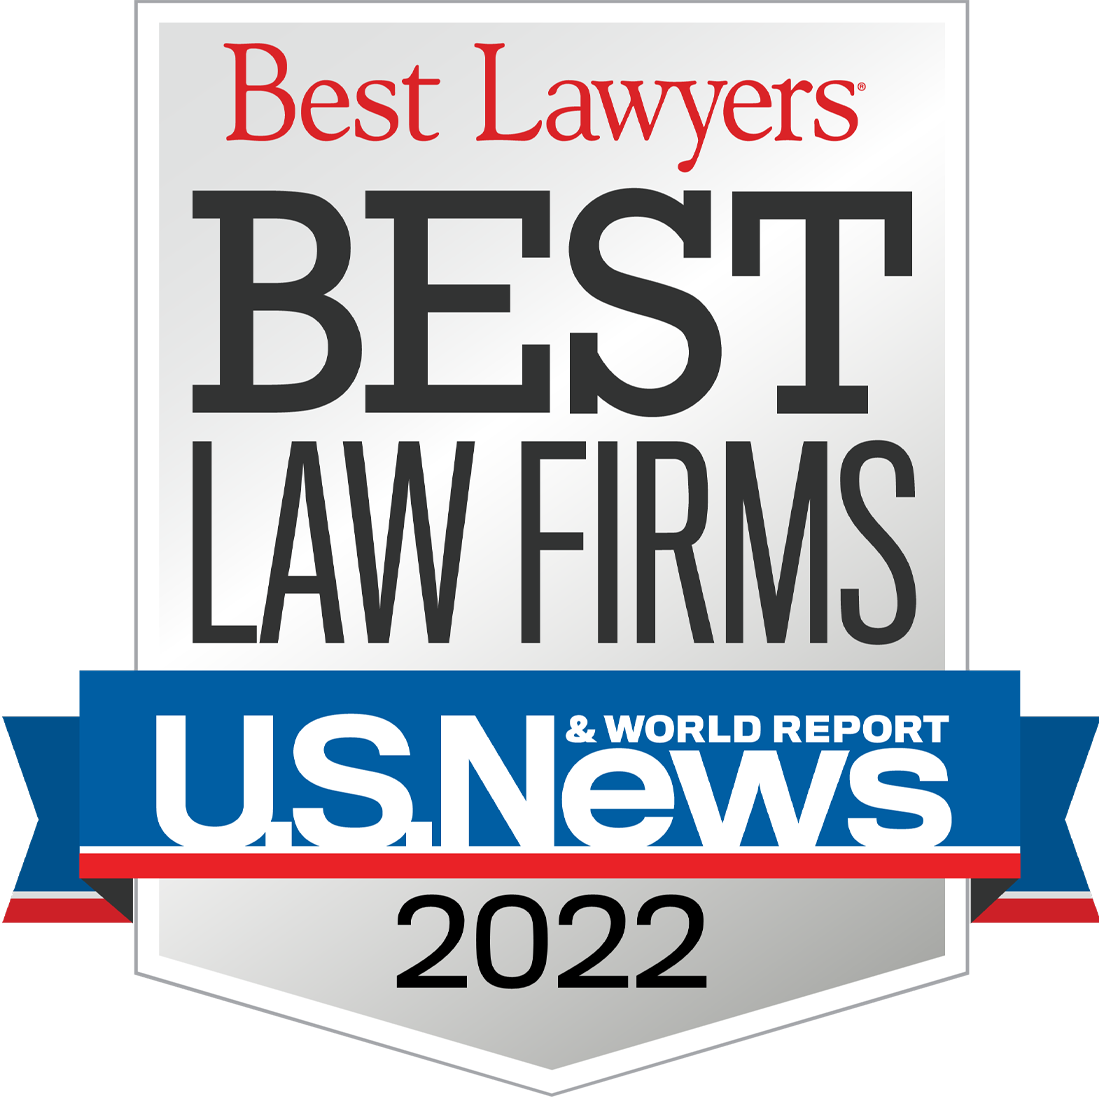 2022 best lawyers and best law firms by U.S. News and World Report badge.